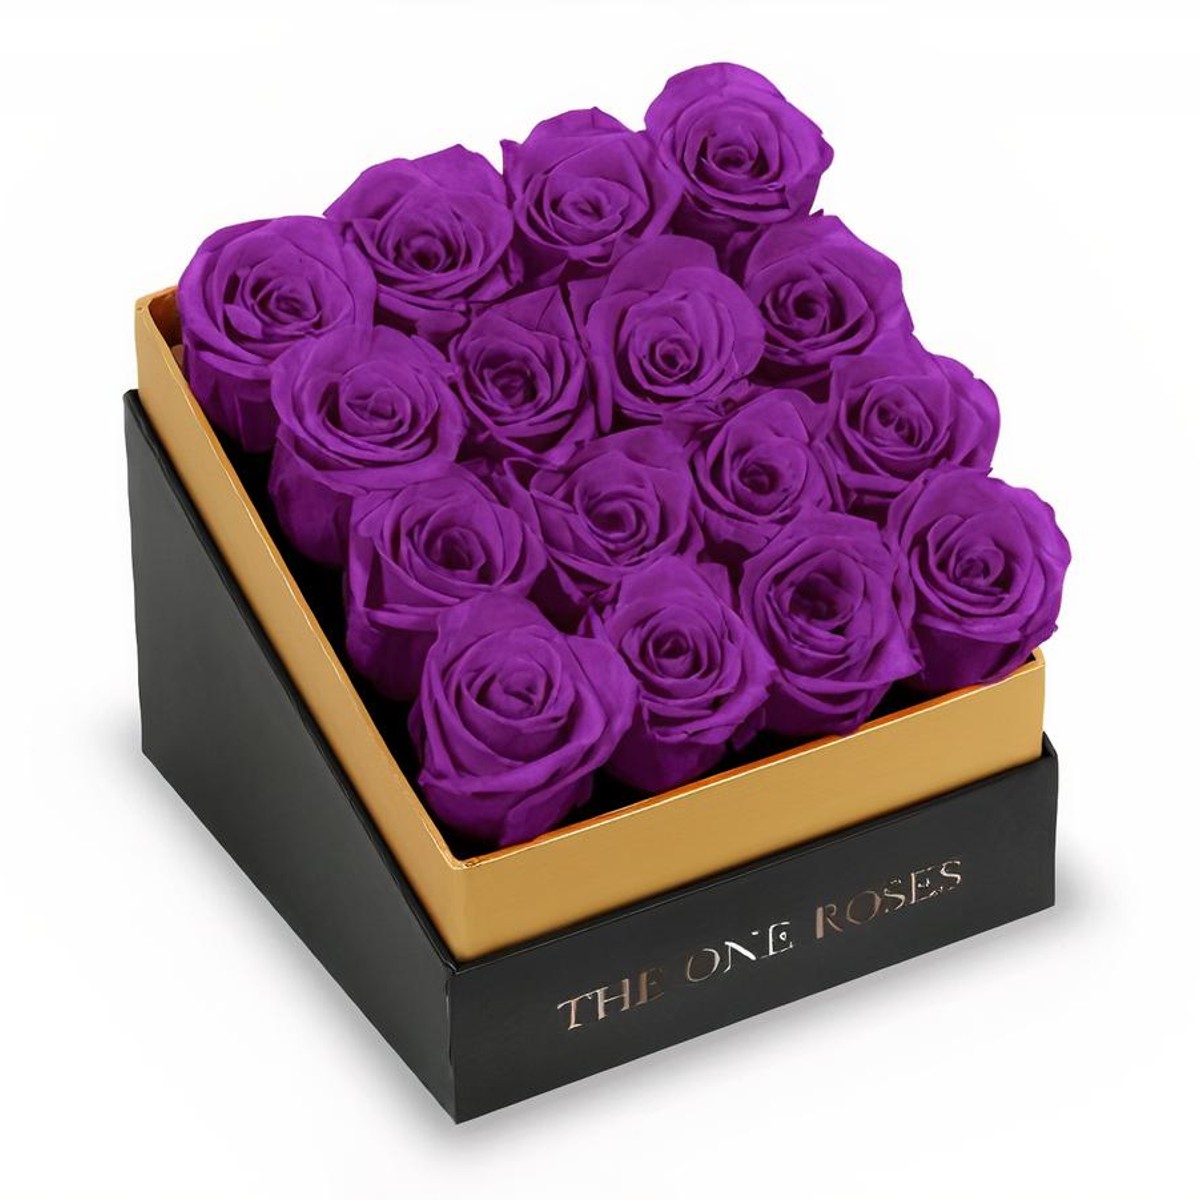 The One Roses () Floral Delivery - DoorDash